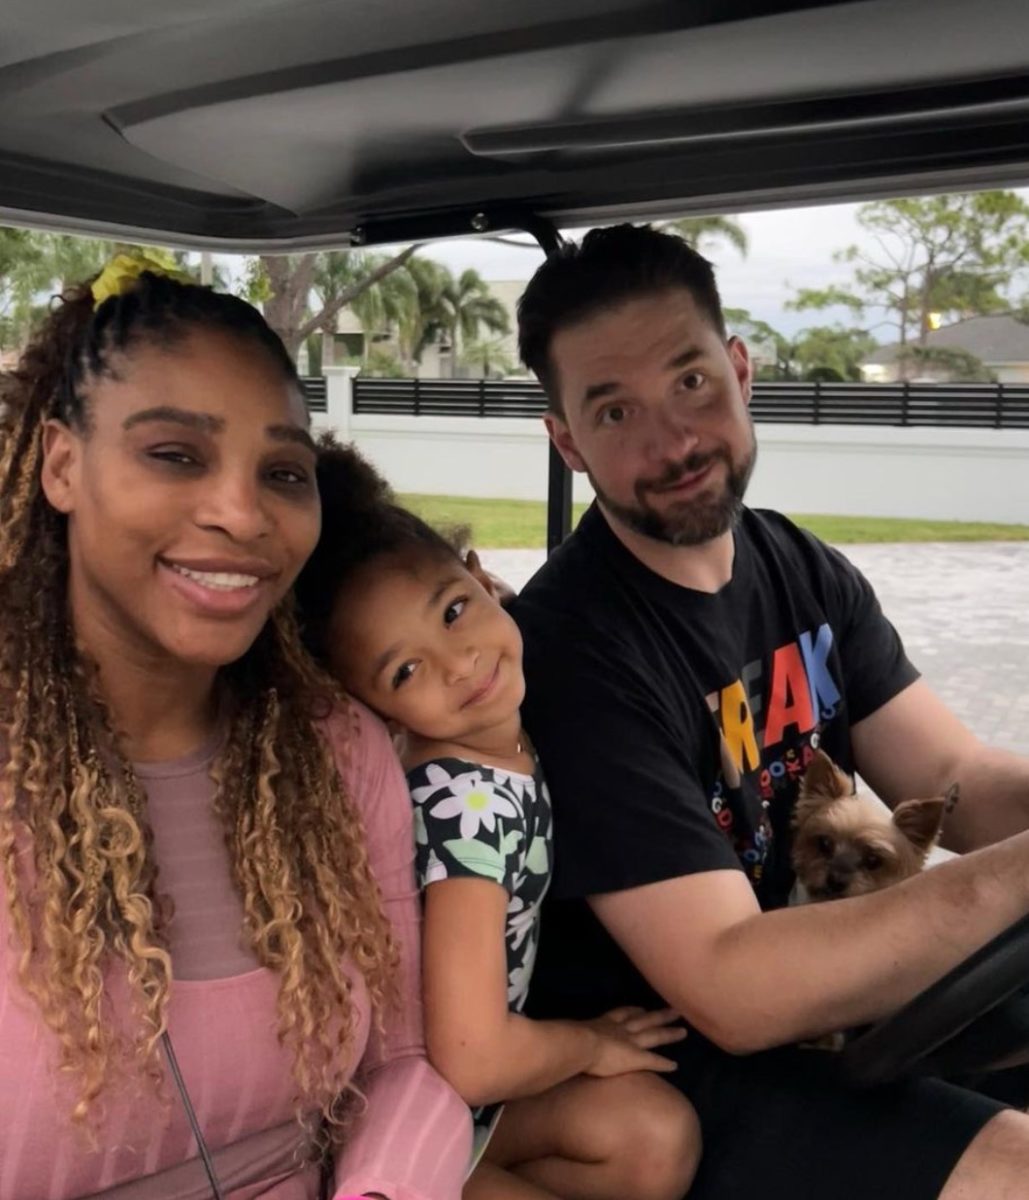 Serena Williams Reveals What She Did With All Her Extra Breastmilk | Serena Williams is officially a mother of two! On August 22, Serena and her husband Alexis Ohanian shared a quick glimpse into their lives as a family of four.